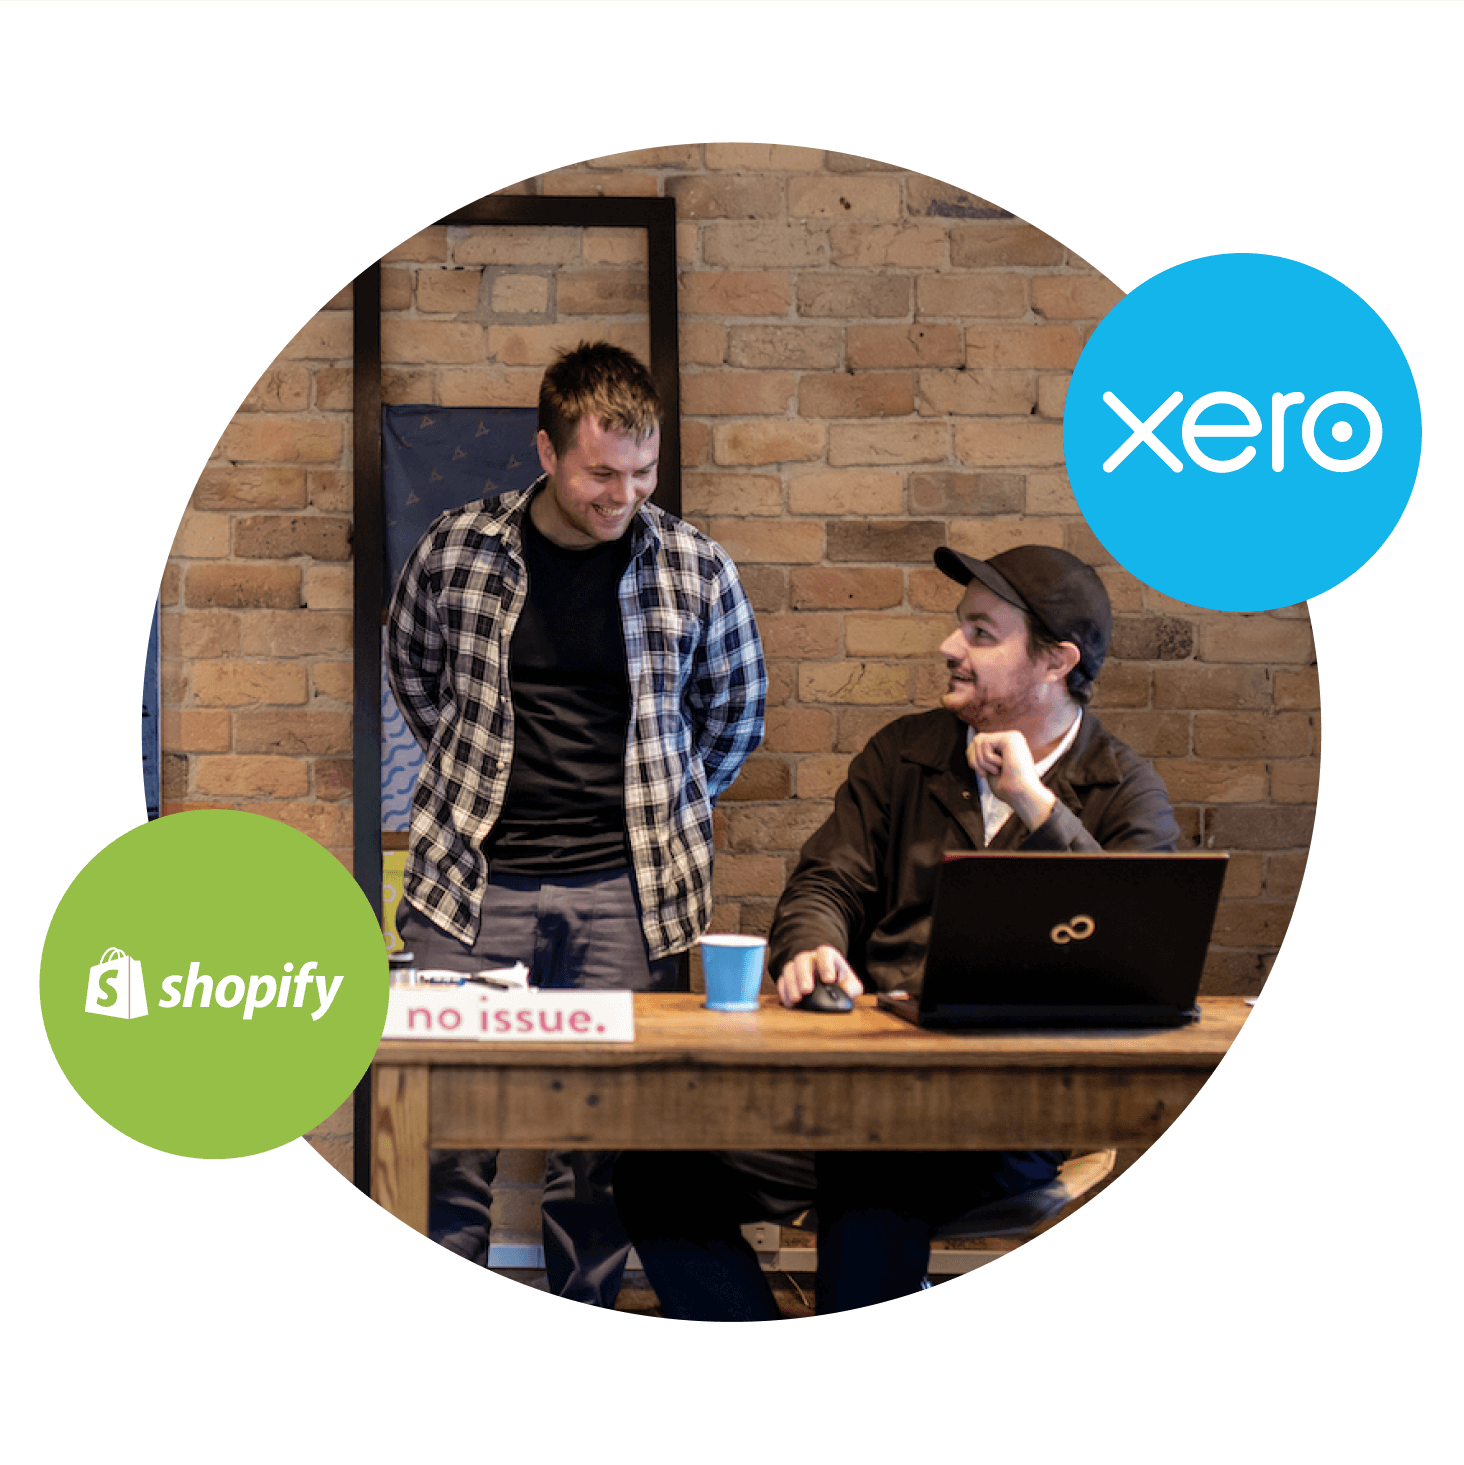 Two United States ecommerce sellers chat about the increase in sales since using Shopify and Xero for their online store.